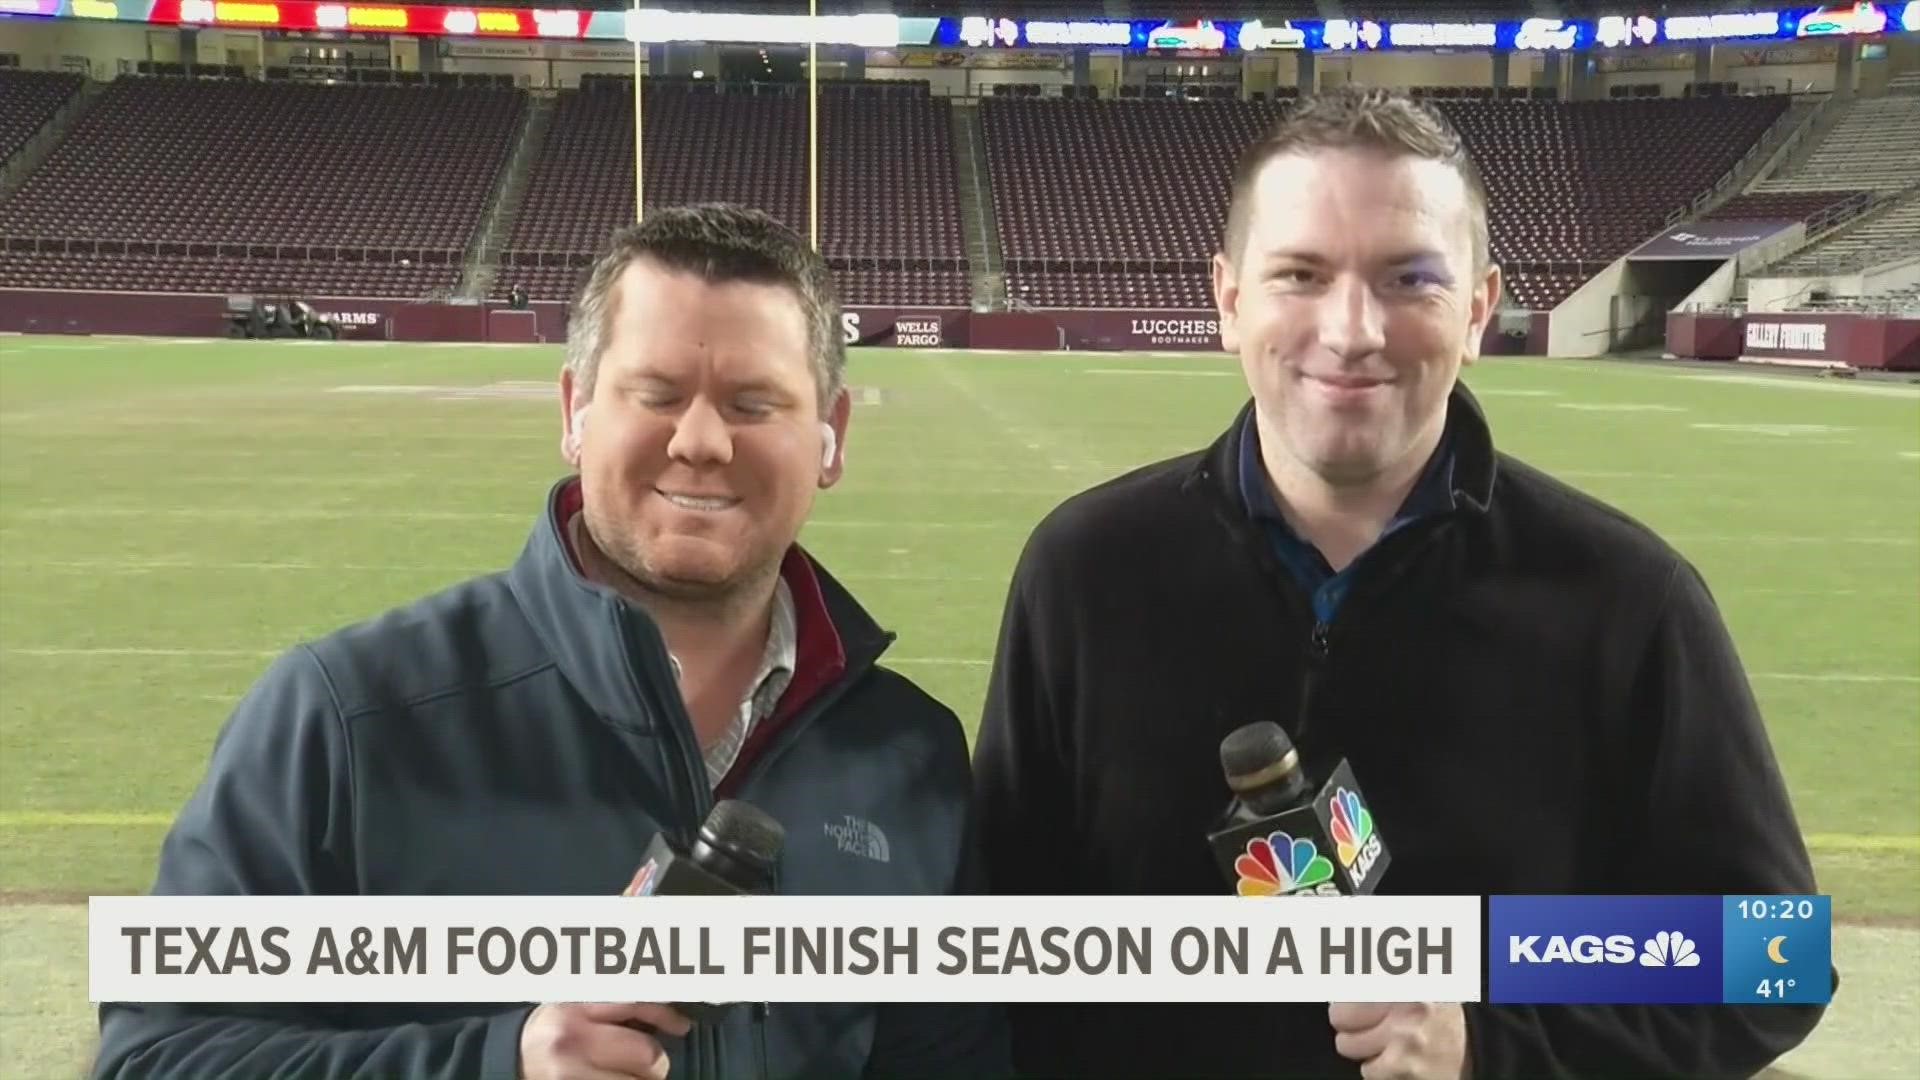 Justin Woodard and Ben Peck go over the keys to Texas A&M's 38-23 win over #5 LSU. The Aggies won't go to a Bowl Game, but they end the season in style at Kyle Field